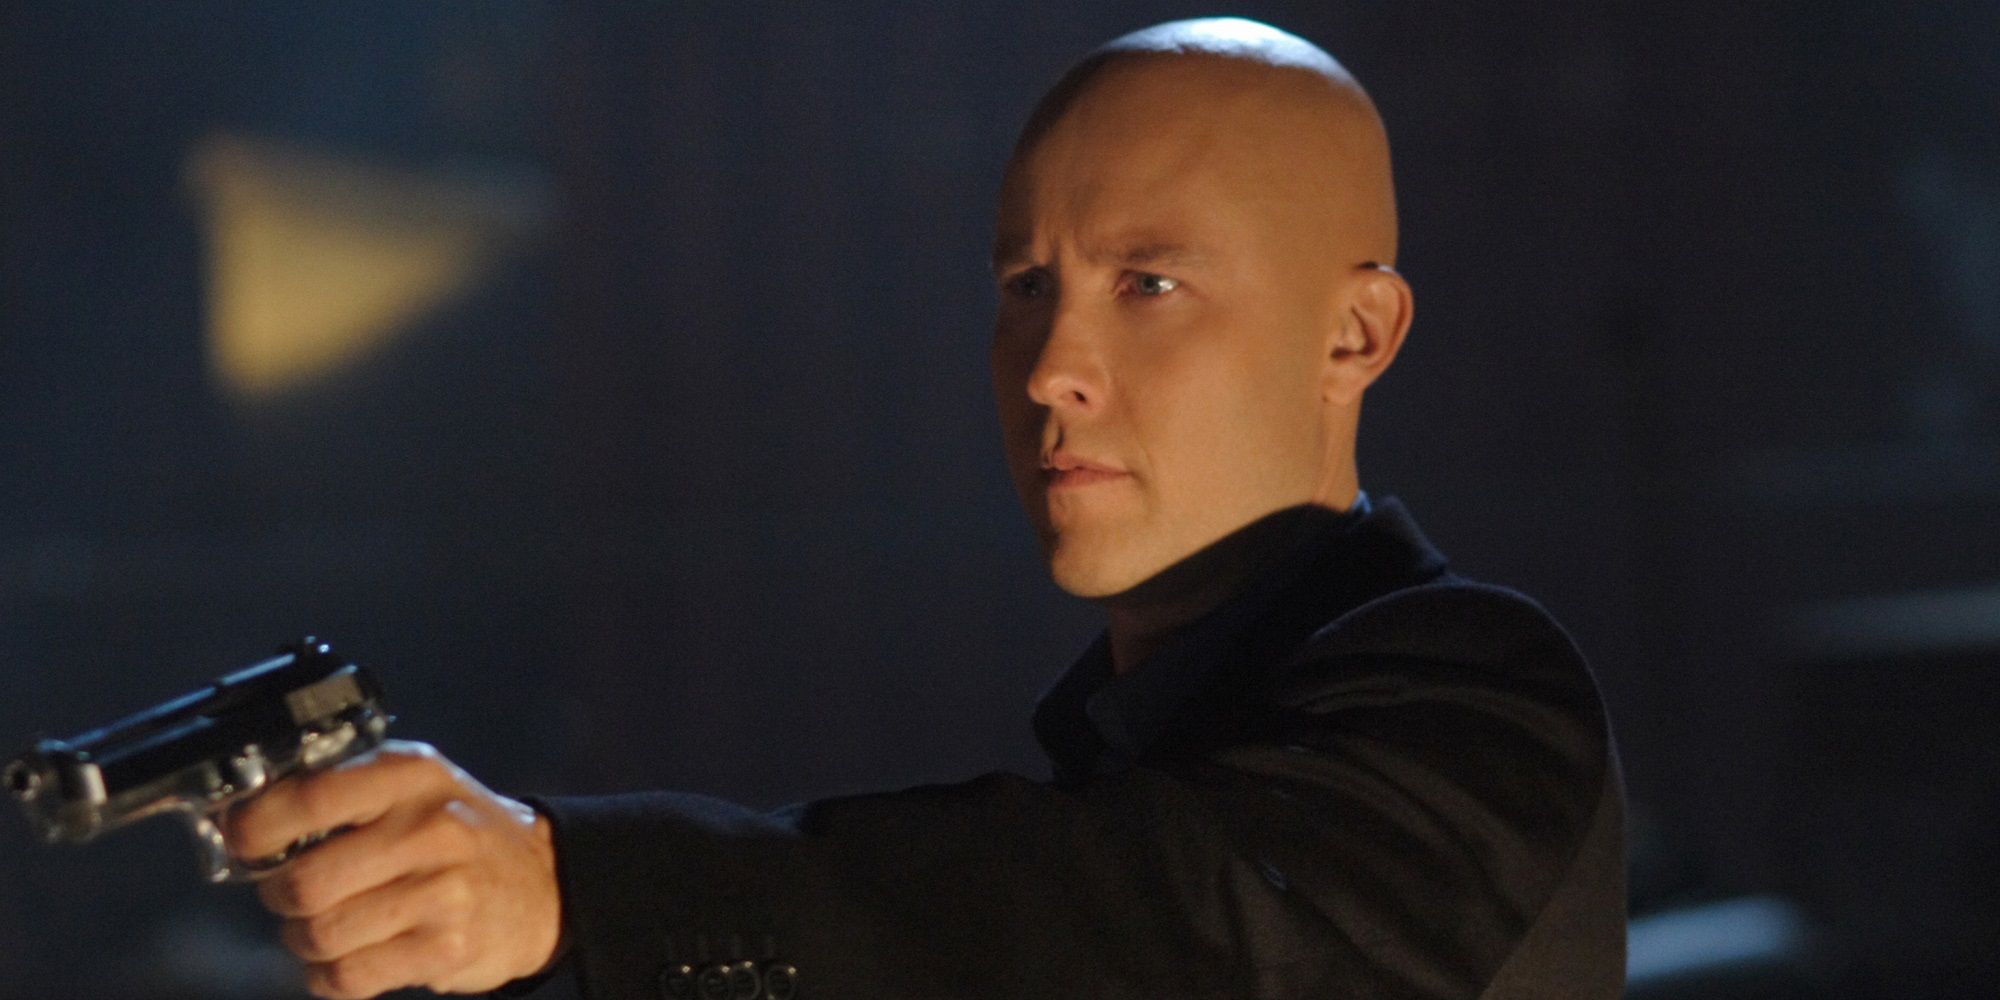 Cure-- Michael Rosenbaum as Lex Luthor in SMALLVILLE on The CW Network. Photo: Marcel Williams/The CW © 2007 The CW Network, LLC. All Rights Reserved.